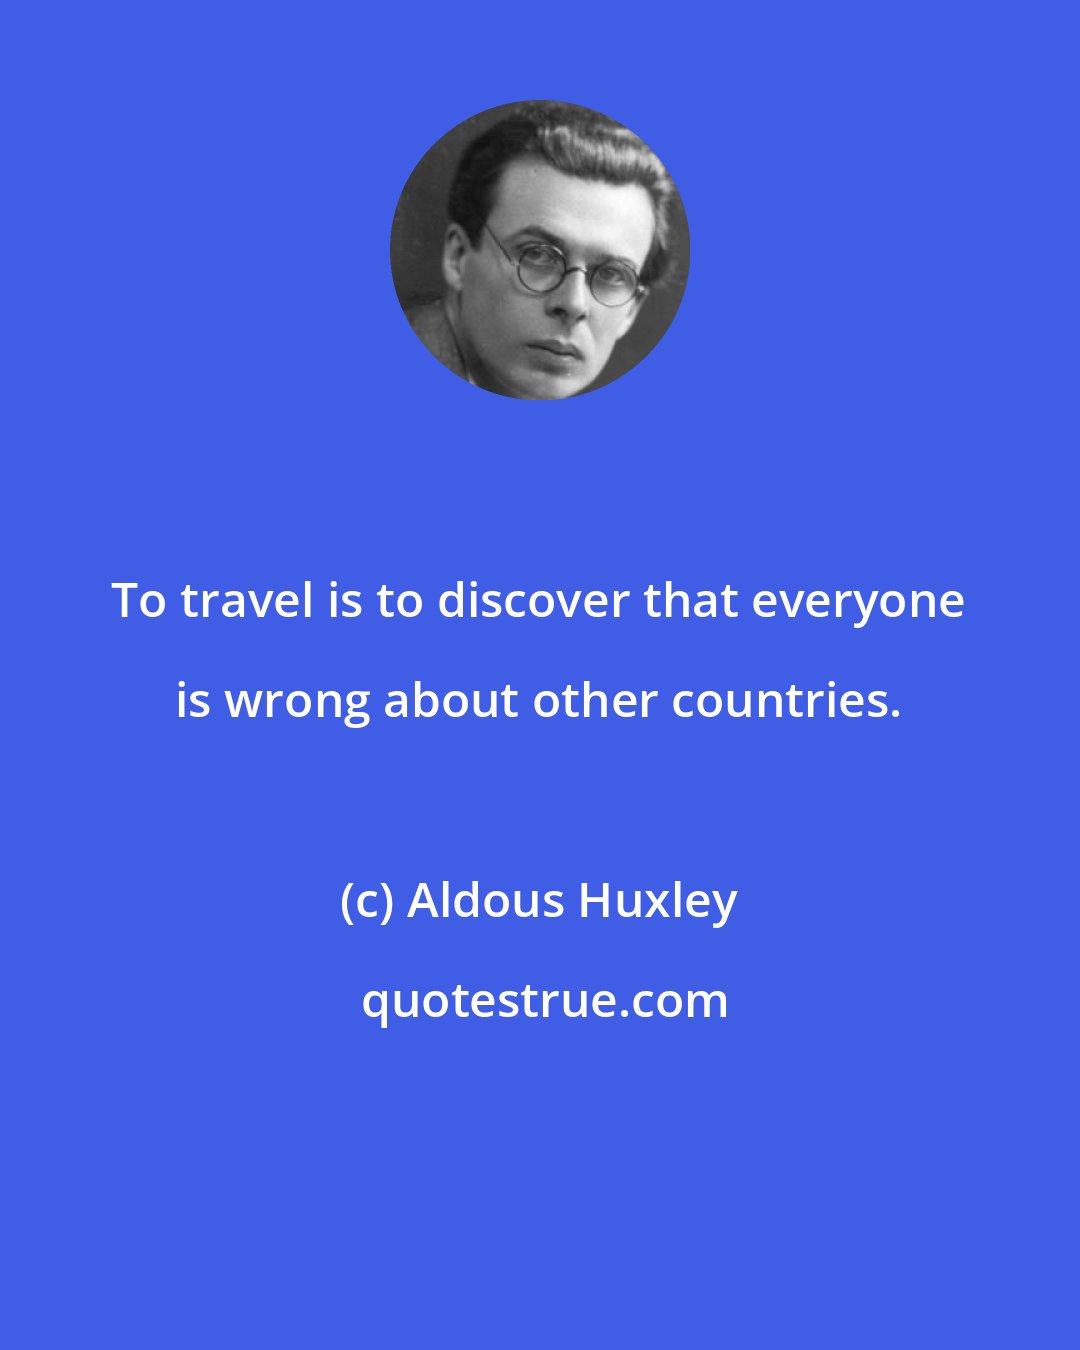 Aldous Huxley: To travel is to discover that everyone is wrong about other countries.